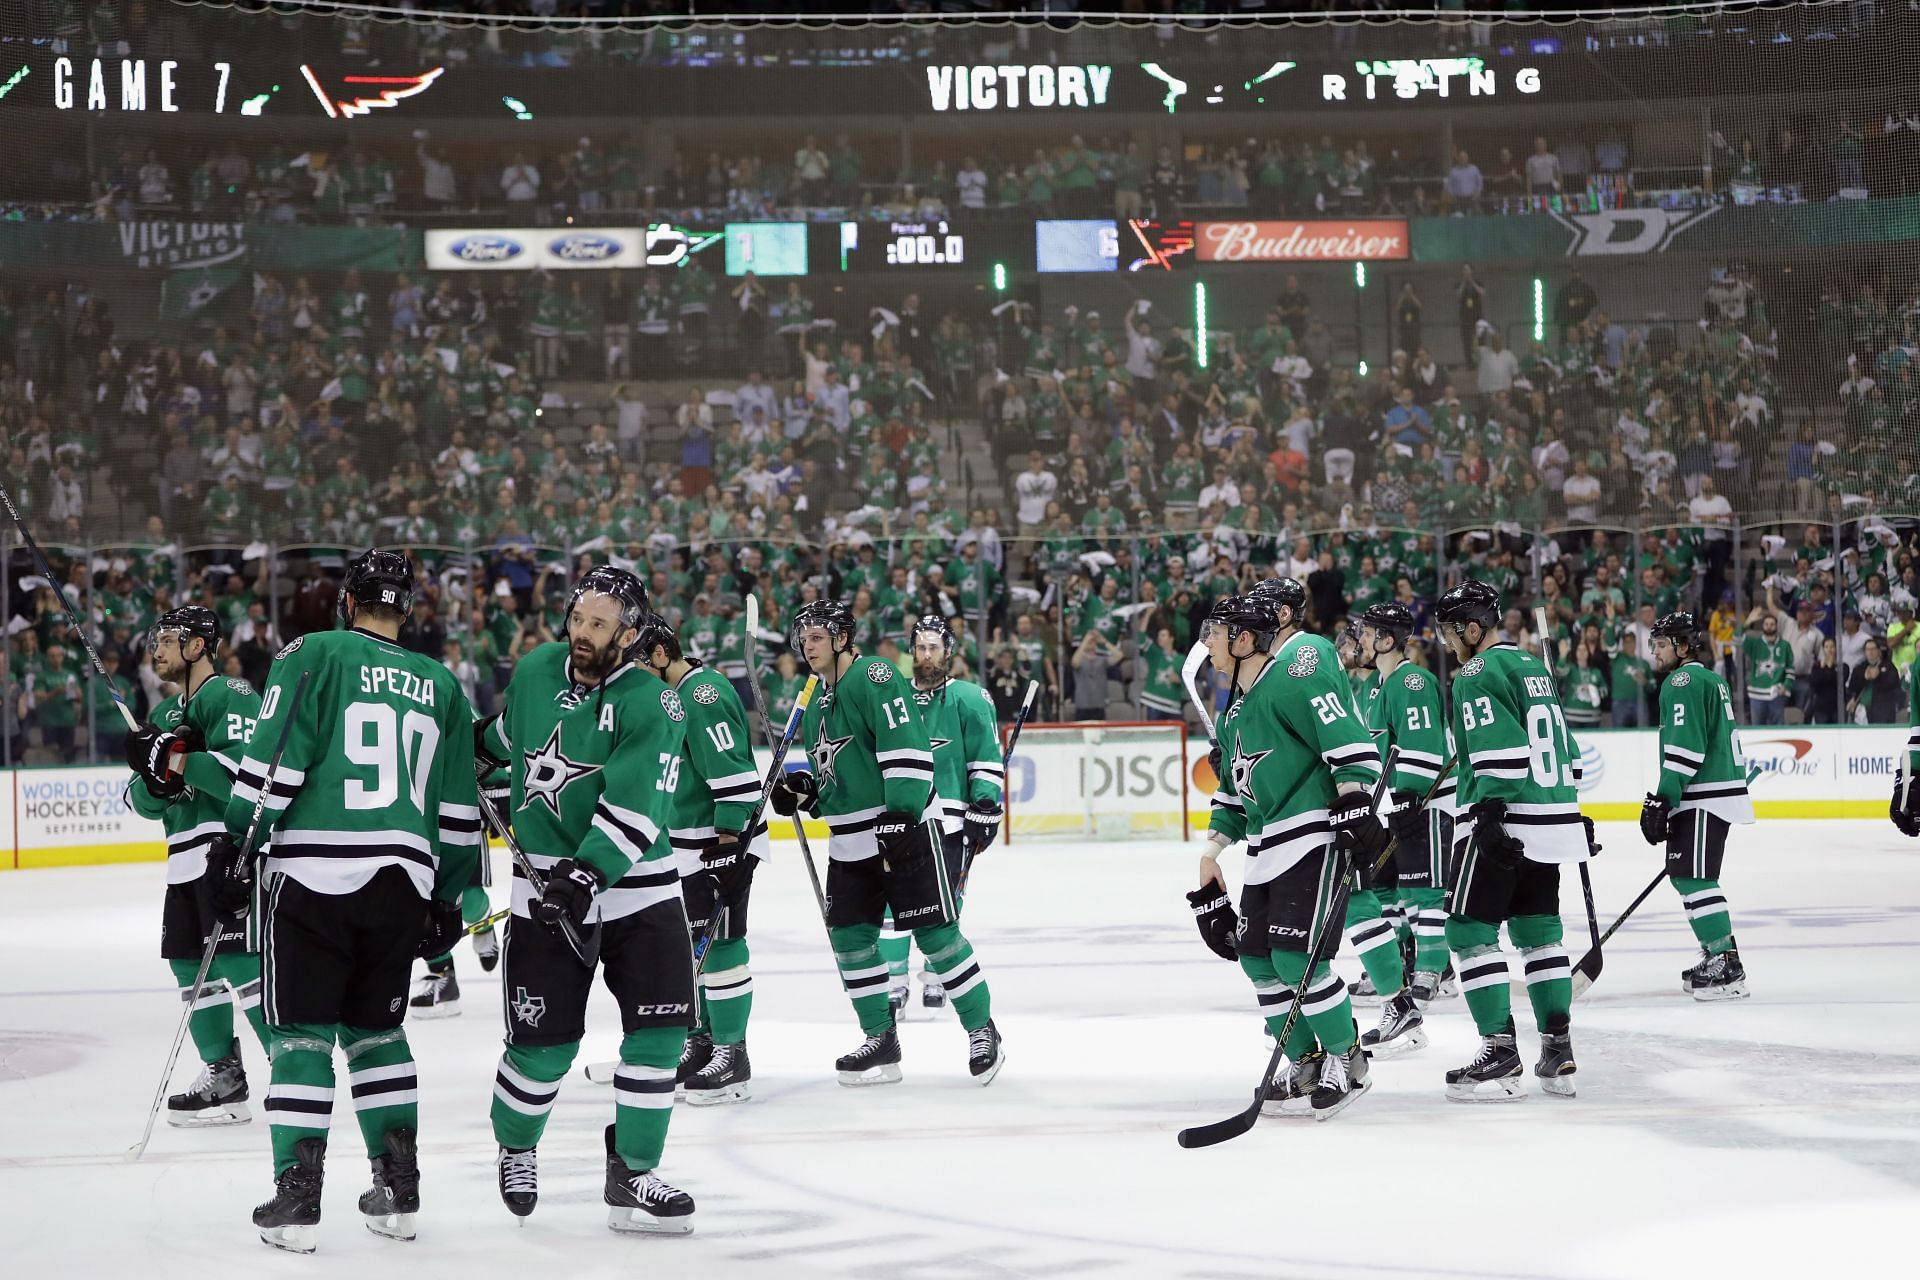 Watch Dallas Stars come very close to tying the game against the Hawks